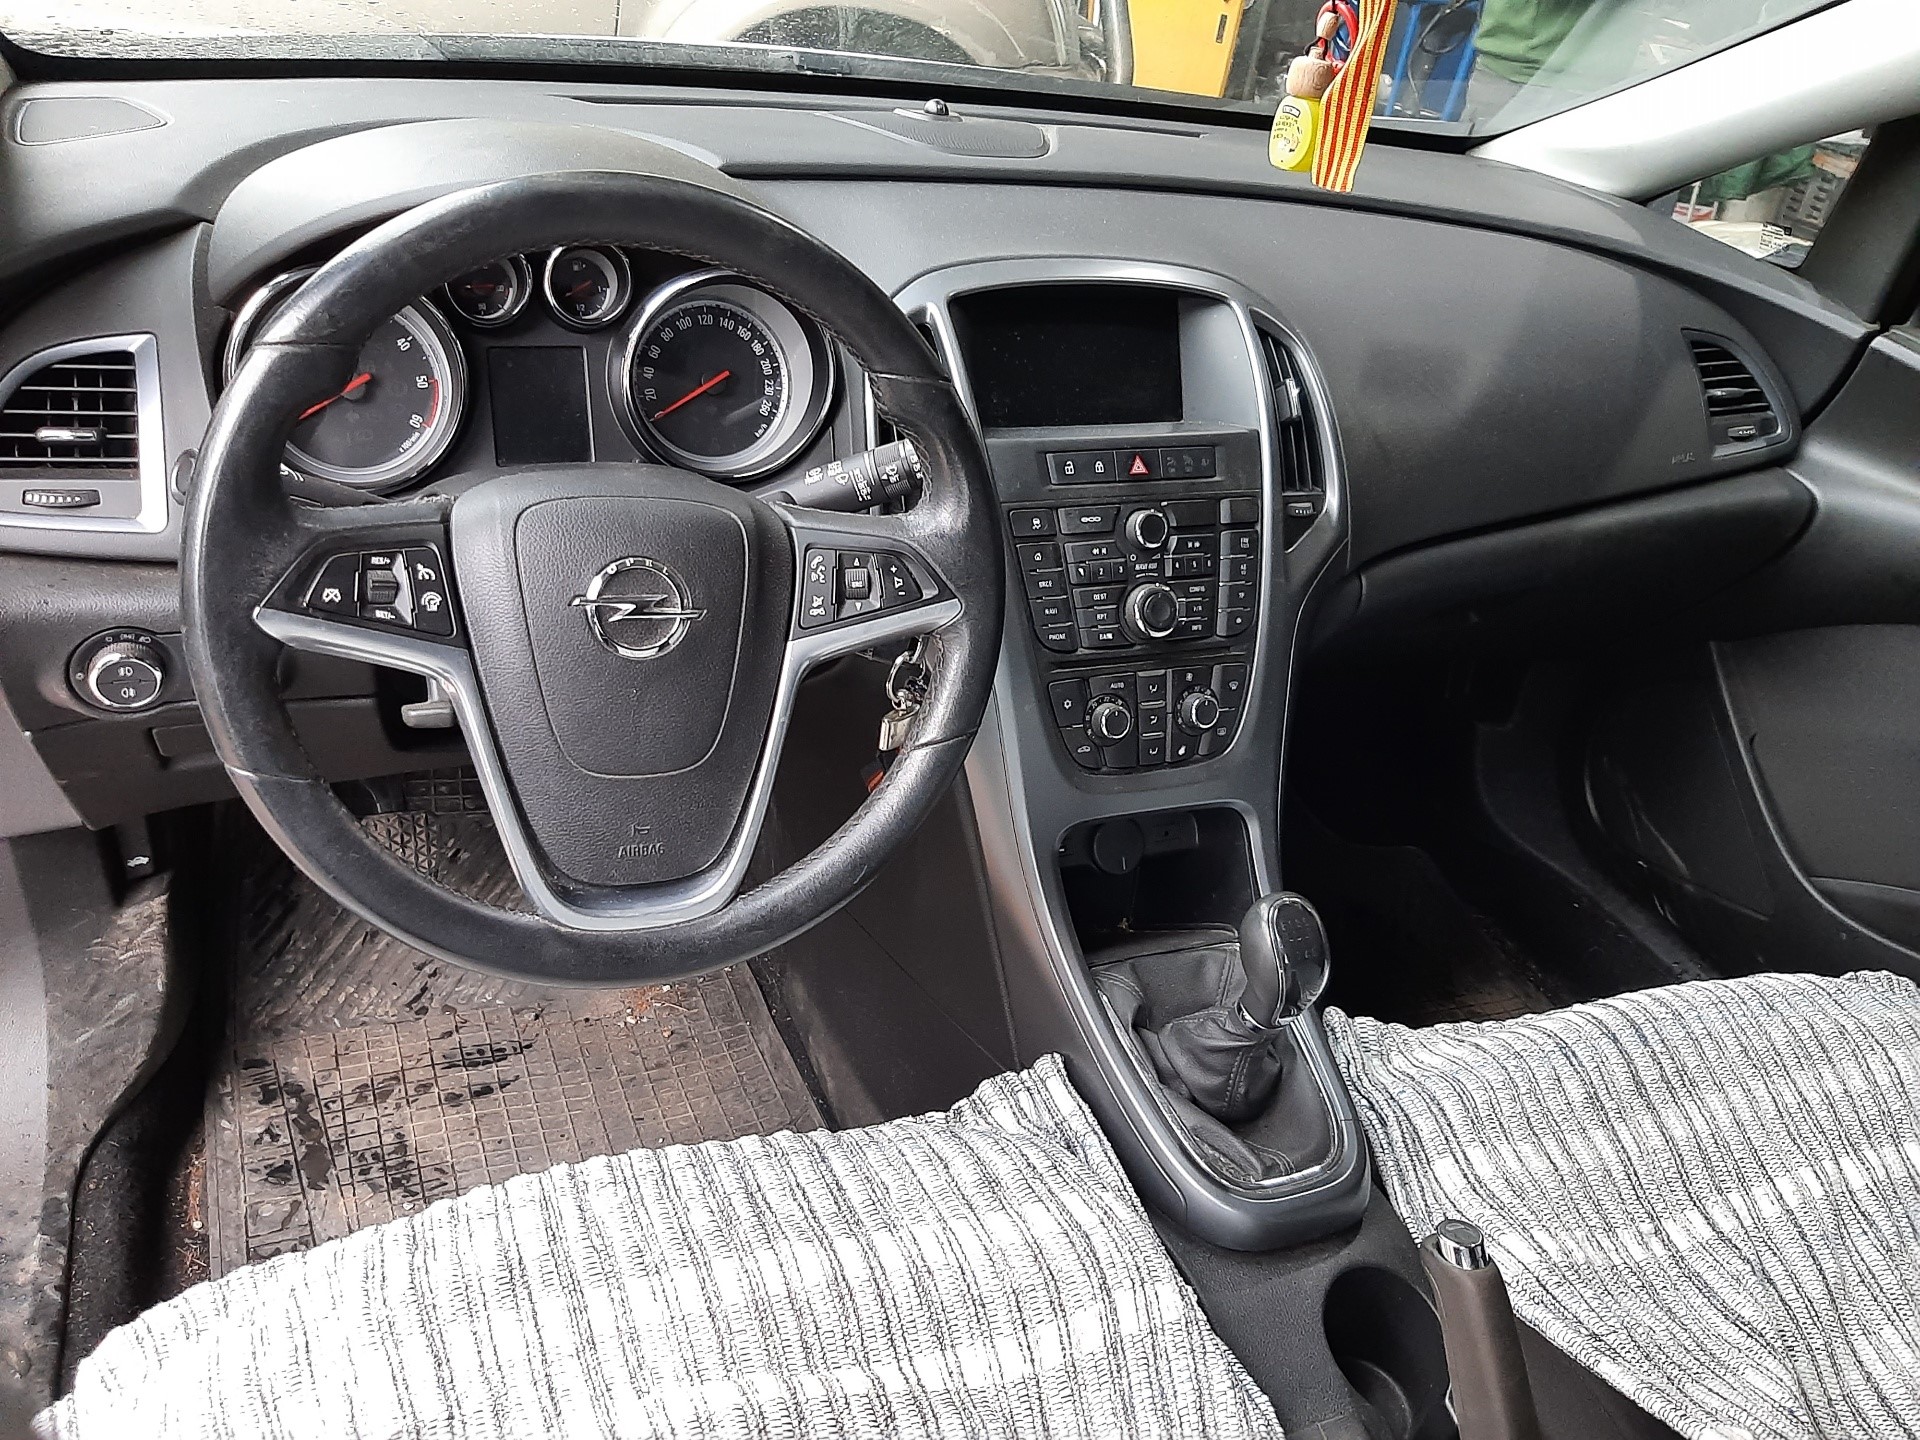 OPEL Astra J (2009-2020) Other Interior Parts 22948484 23127271